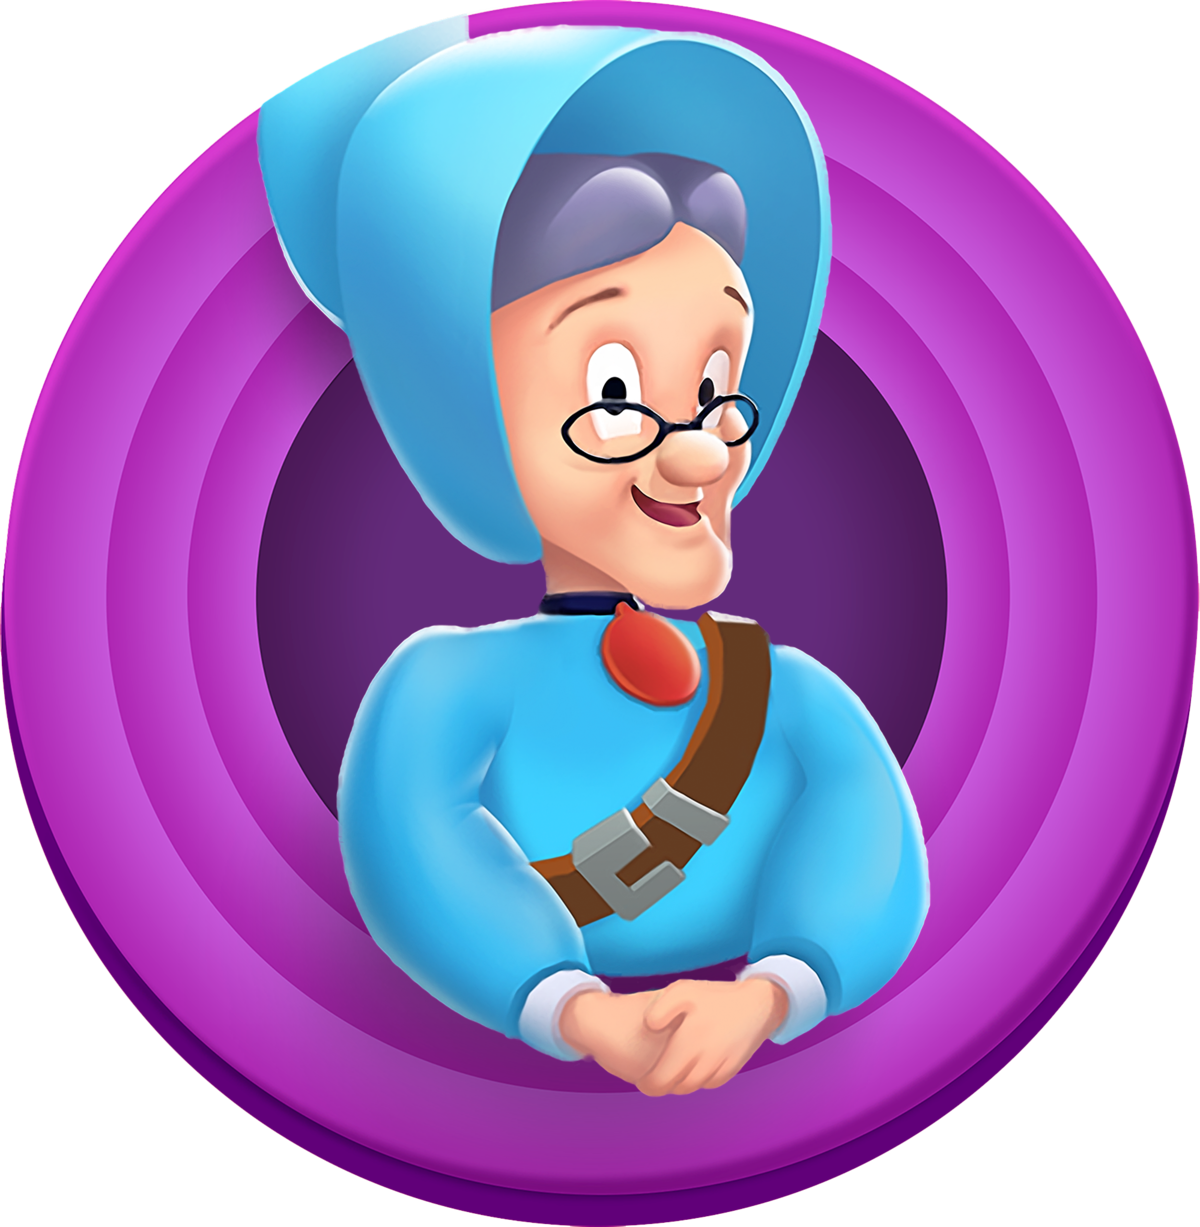 A Cartoon Of A Woman In A Blue Hat